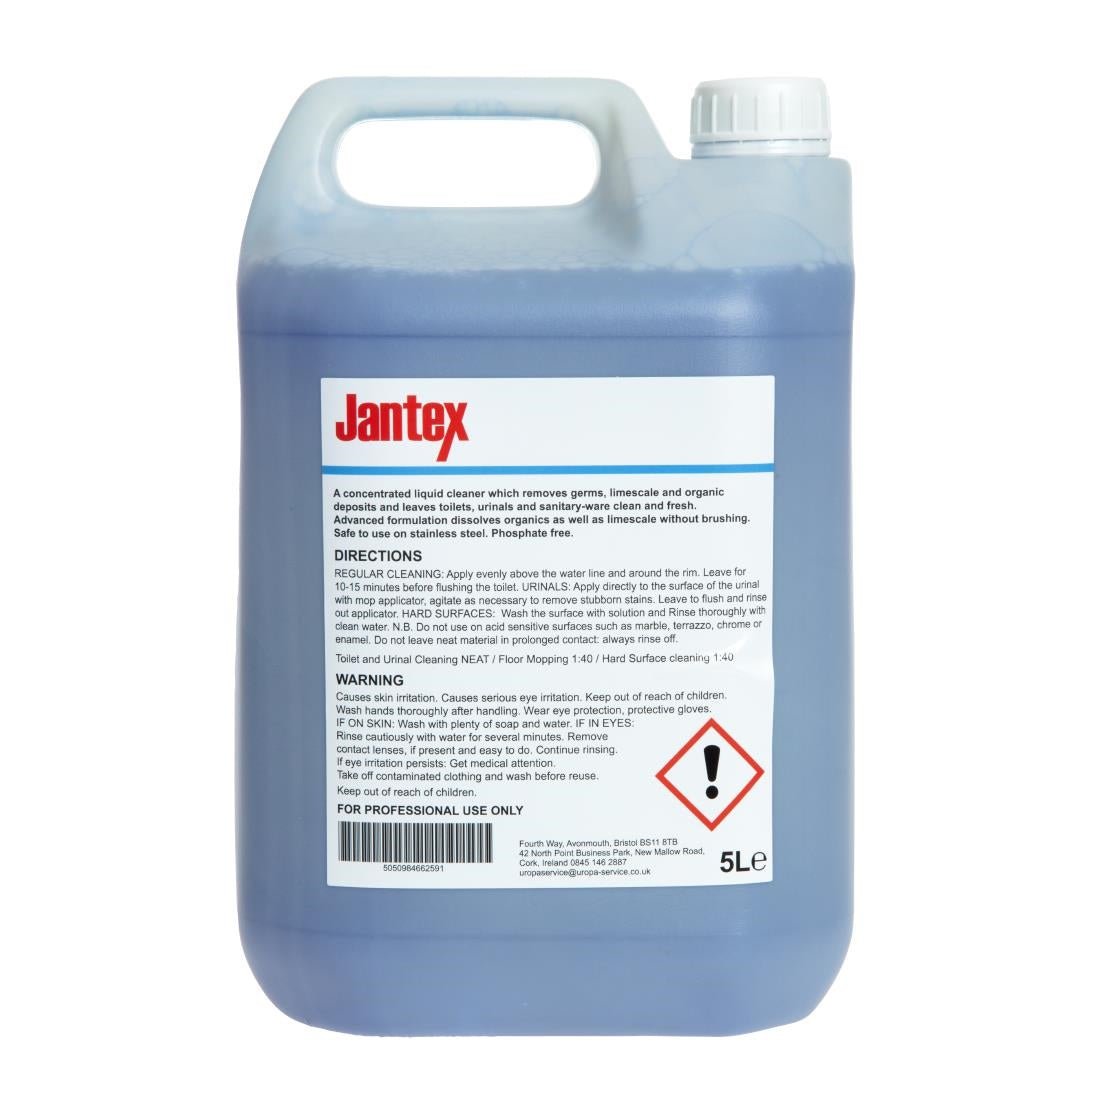 Jantex Toilet Cleaner Ready To Use 5Ltr JD Catering Equipment Solutions Ltd